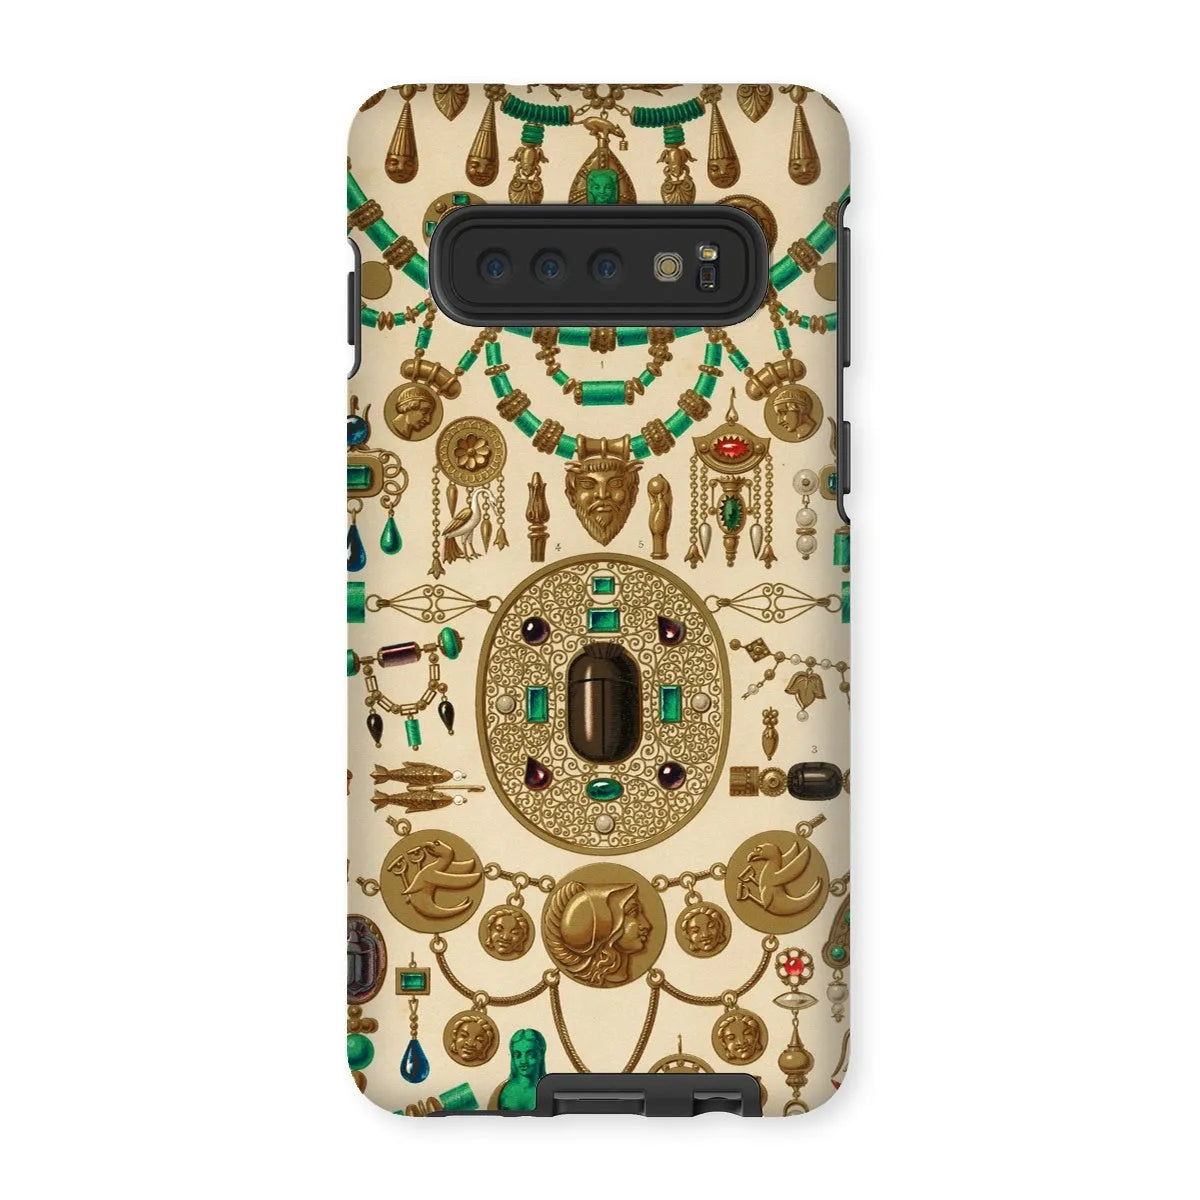 Etruscan Jewelry By Auguste Racinet Art Phone Case - Samsung Galaxy S10 / Matte - Mobile Phone Cases - Aesthetic Art